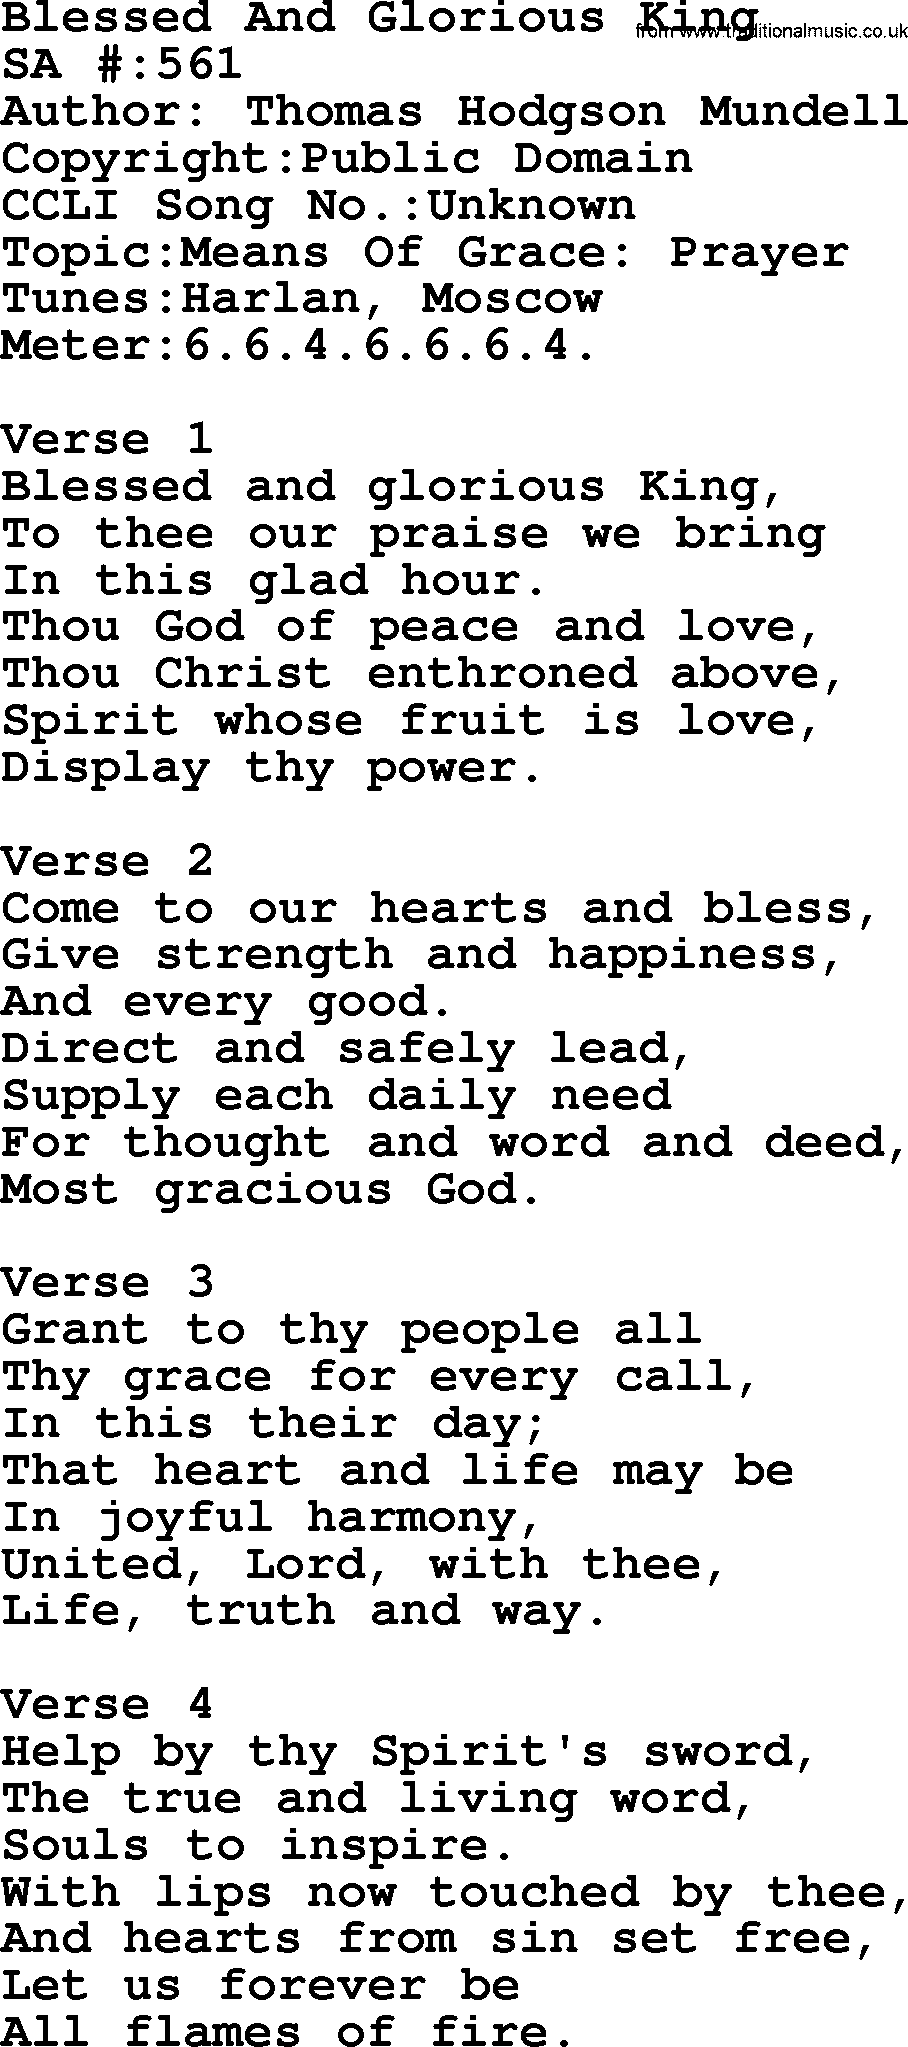 Salvation Army Hymnal, title: Blessed And Glorious King, with lyrics and PDF,